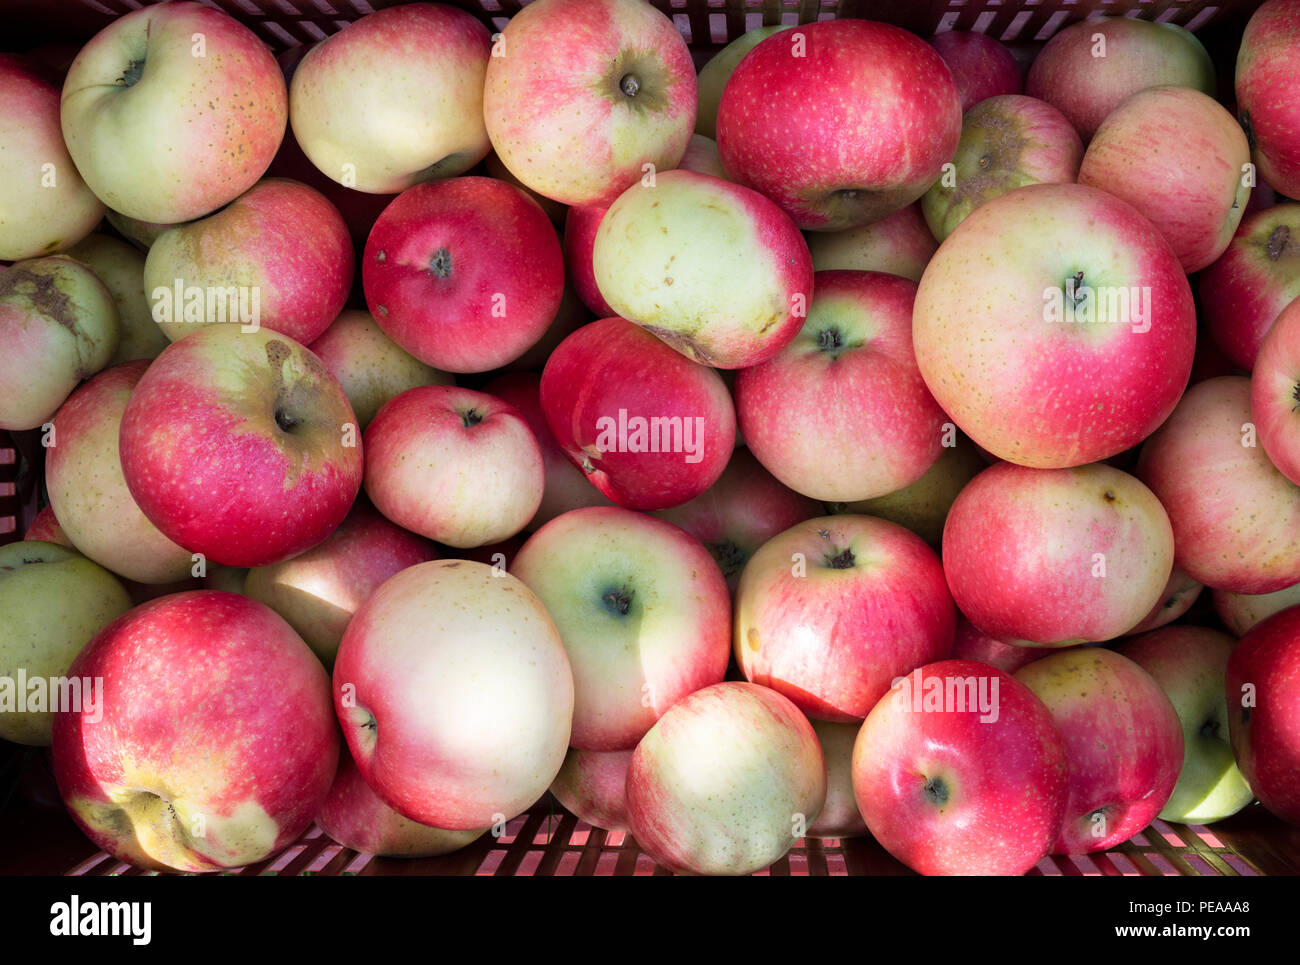 Malus domestica ‘Discovery’. Harvested Apples ‘Discovery’ from above in a plastic tray . UK Stock Photo